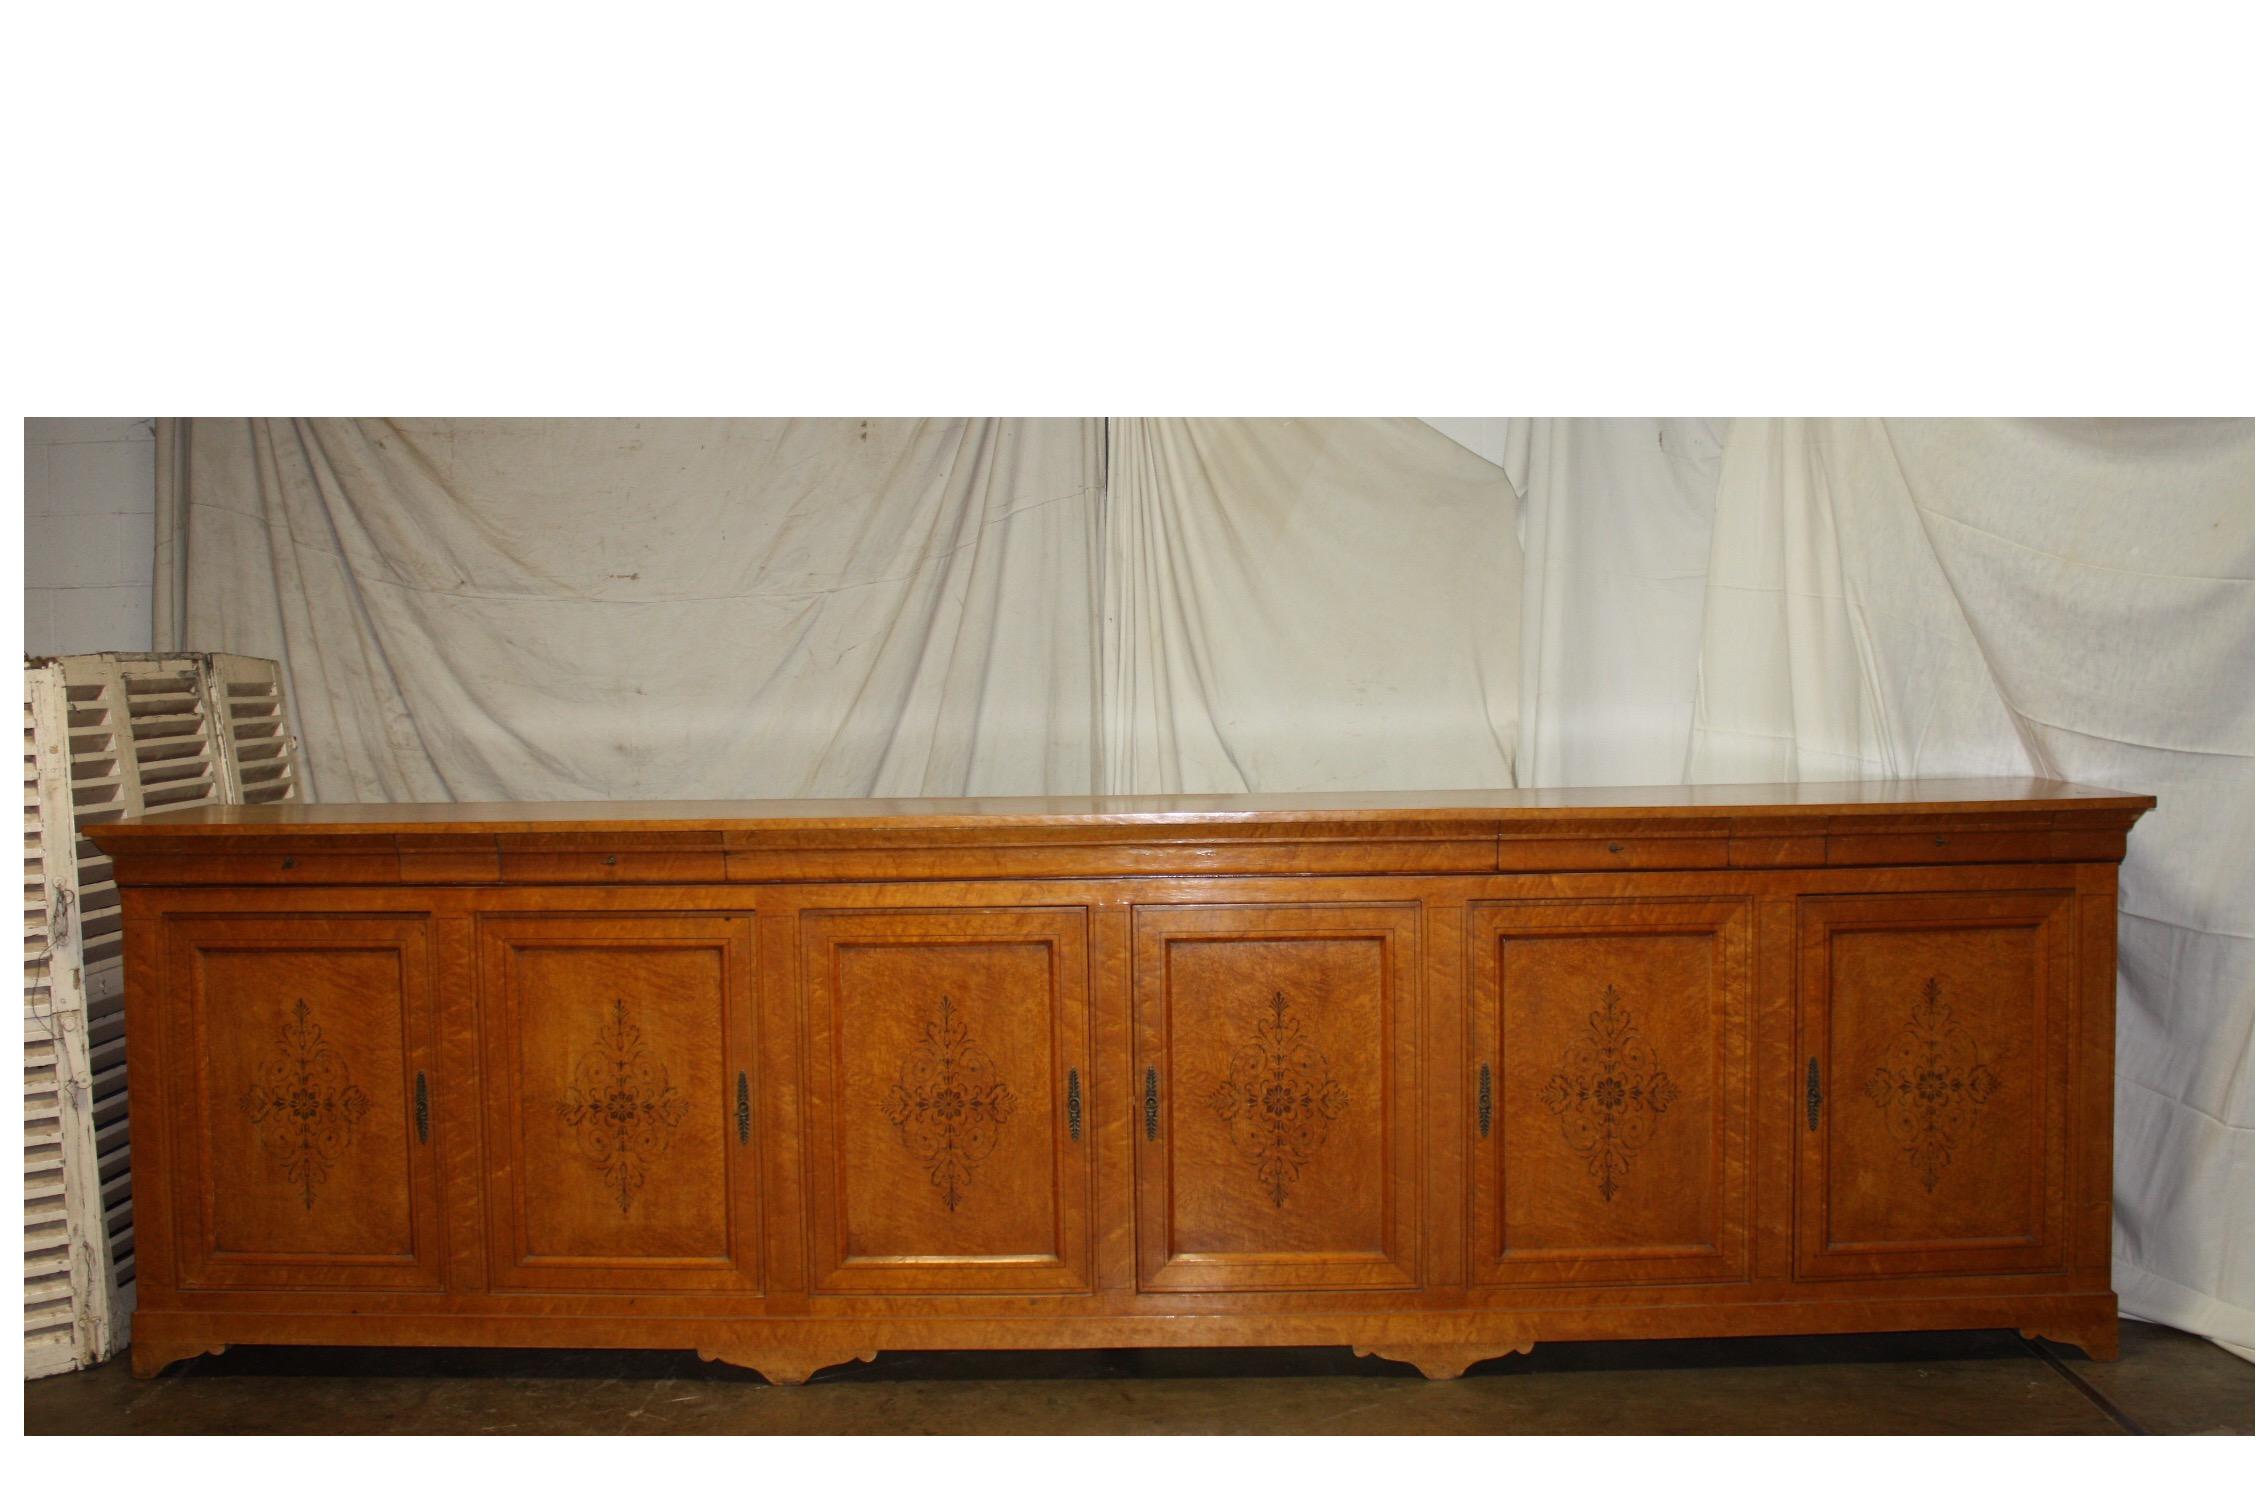 Rare early 19th century French Charles X sideboard. It has 4 drawers and 6 doors. Very good condition.